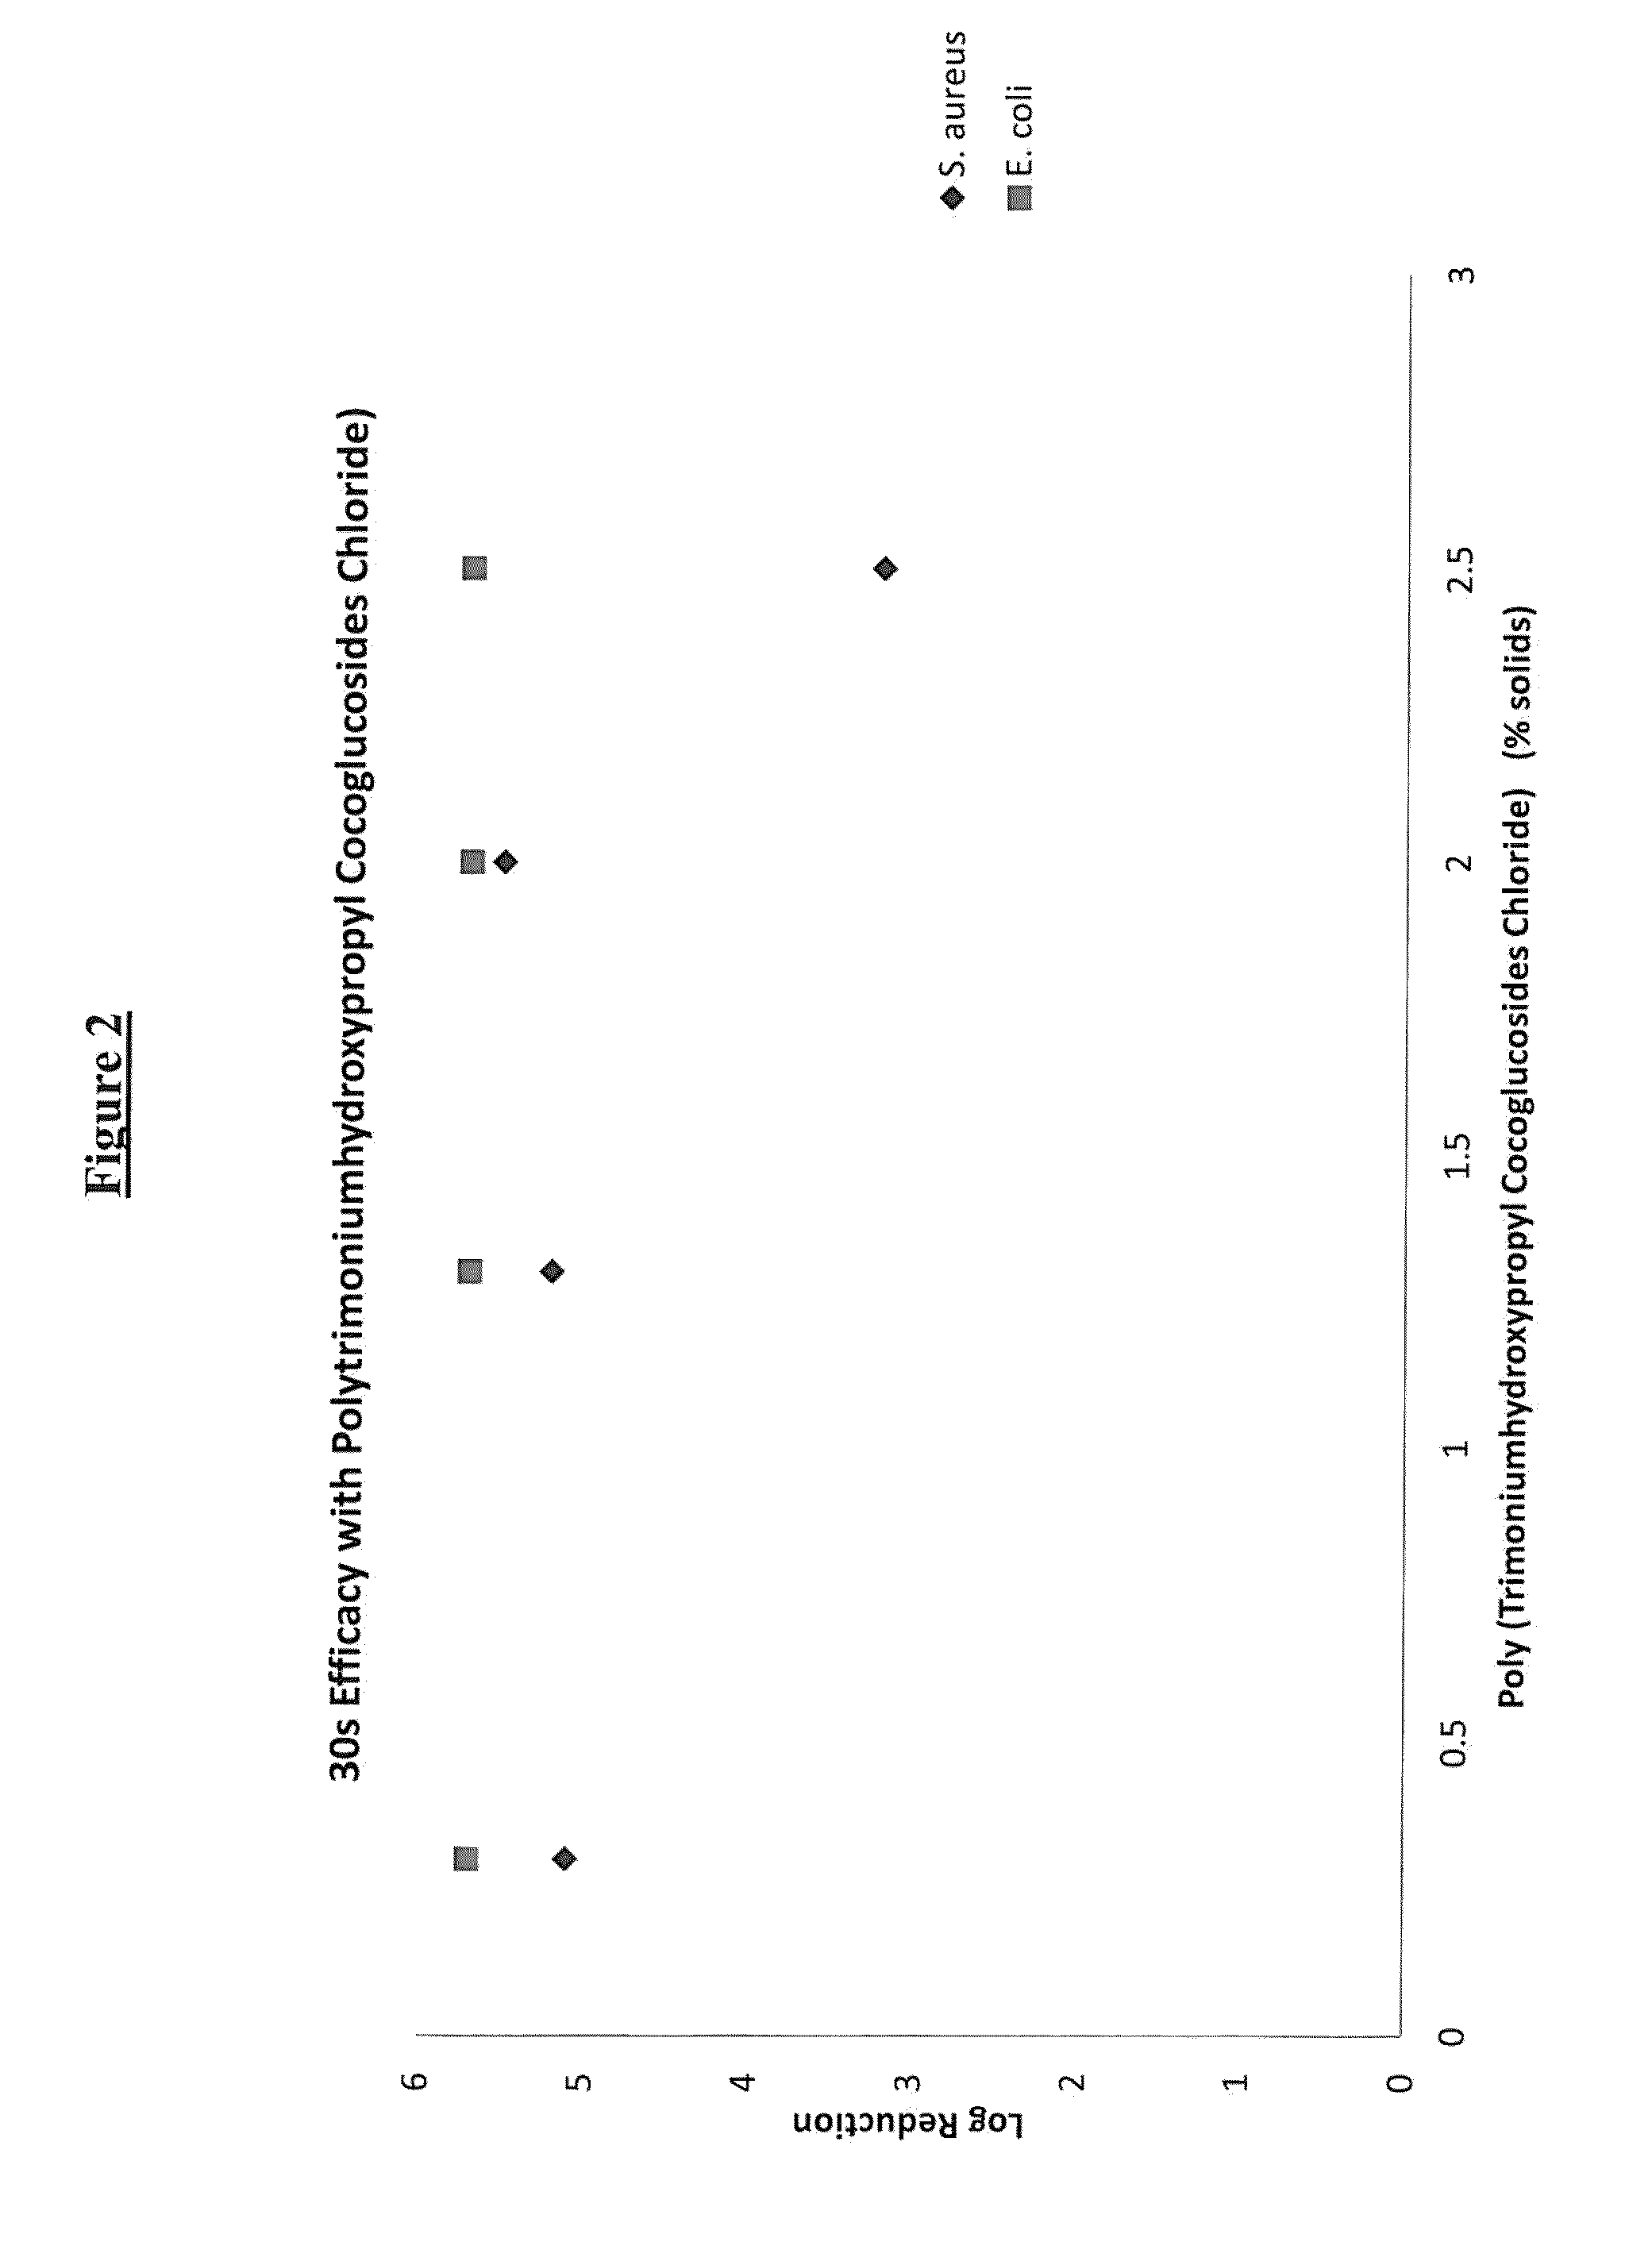 Antimicrobial compositions containing cationic active ingredients and quaternary sugar derived surfactants